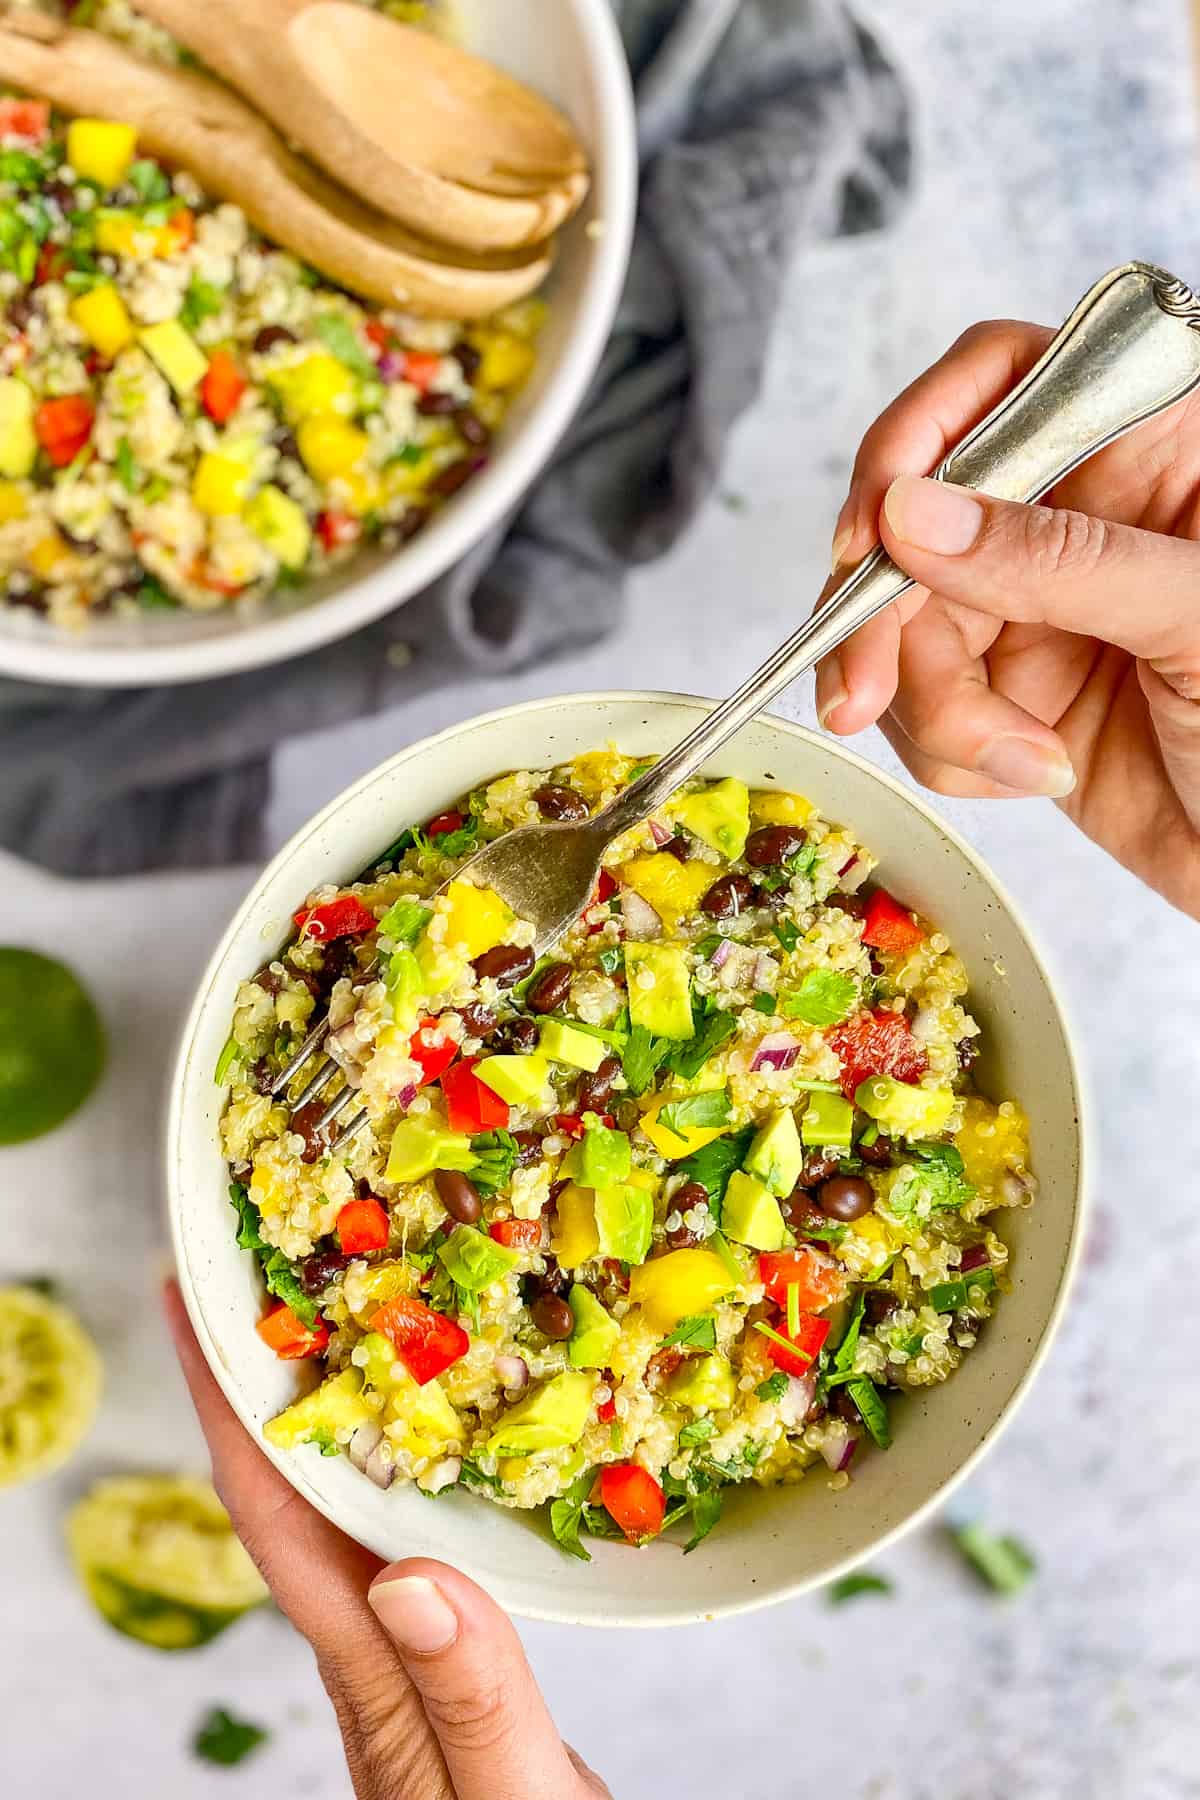 Hand holding a fork and a bowl of vegan quinoa salad.